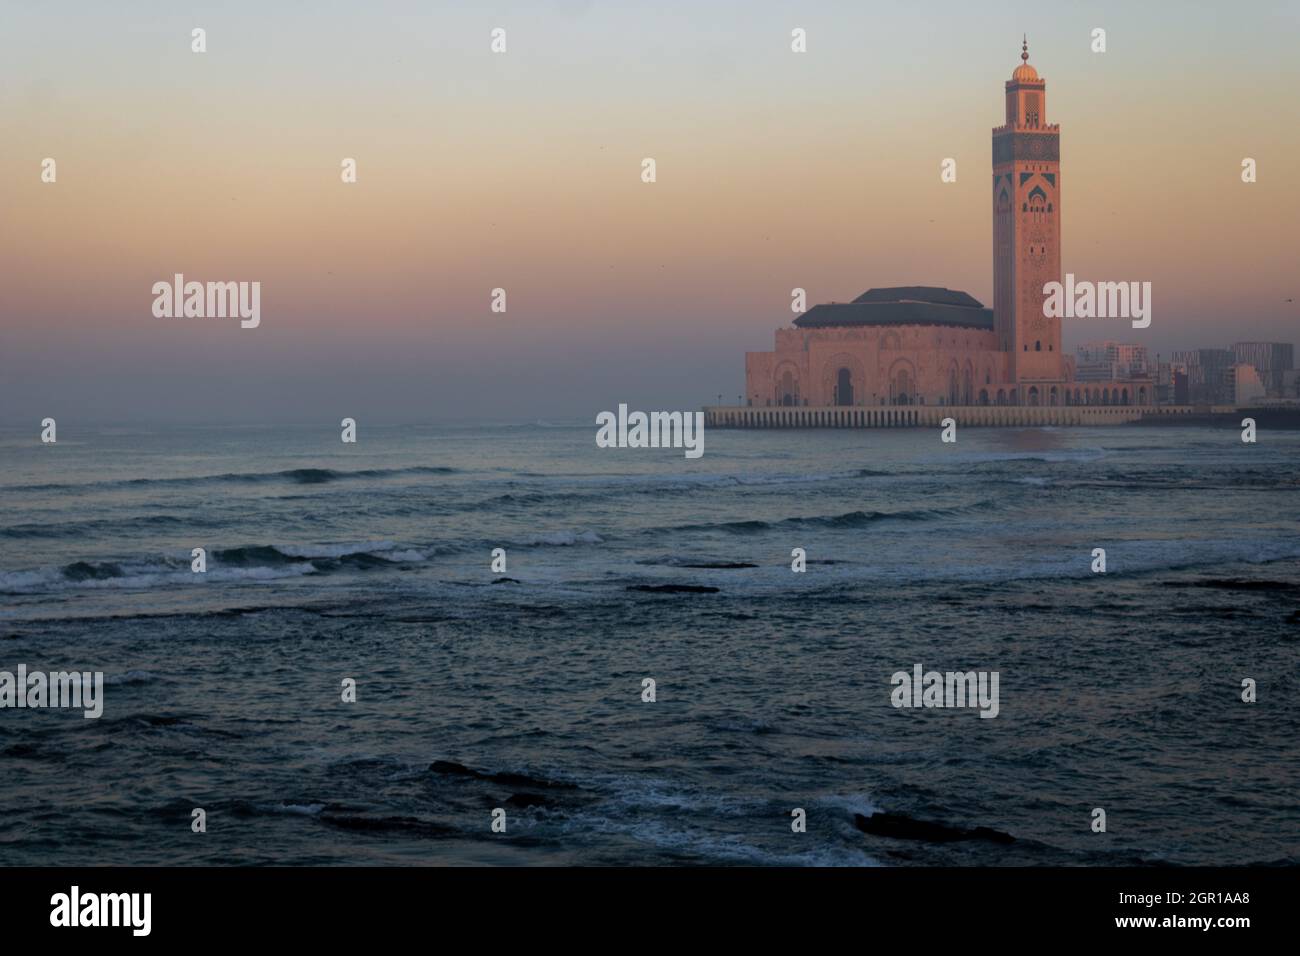 View Of Sea And Hassan 2 Mosque Against Sky During Sunset Stock Photo